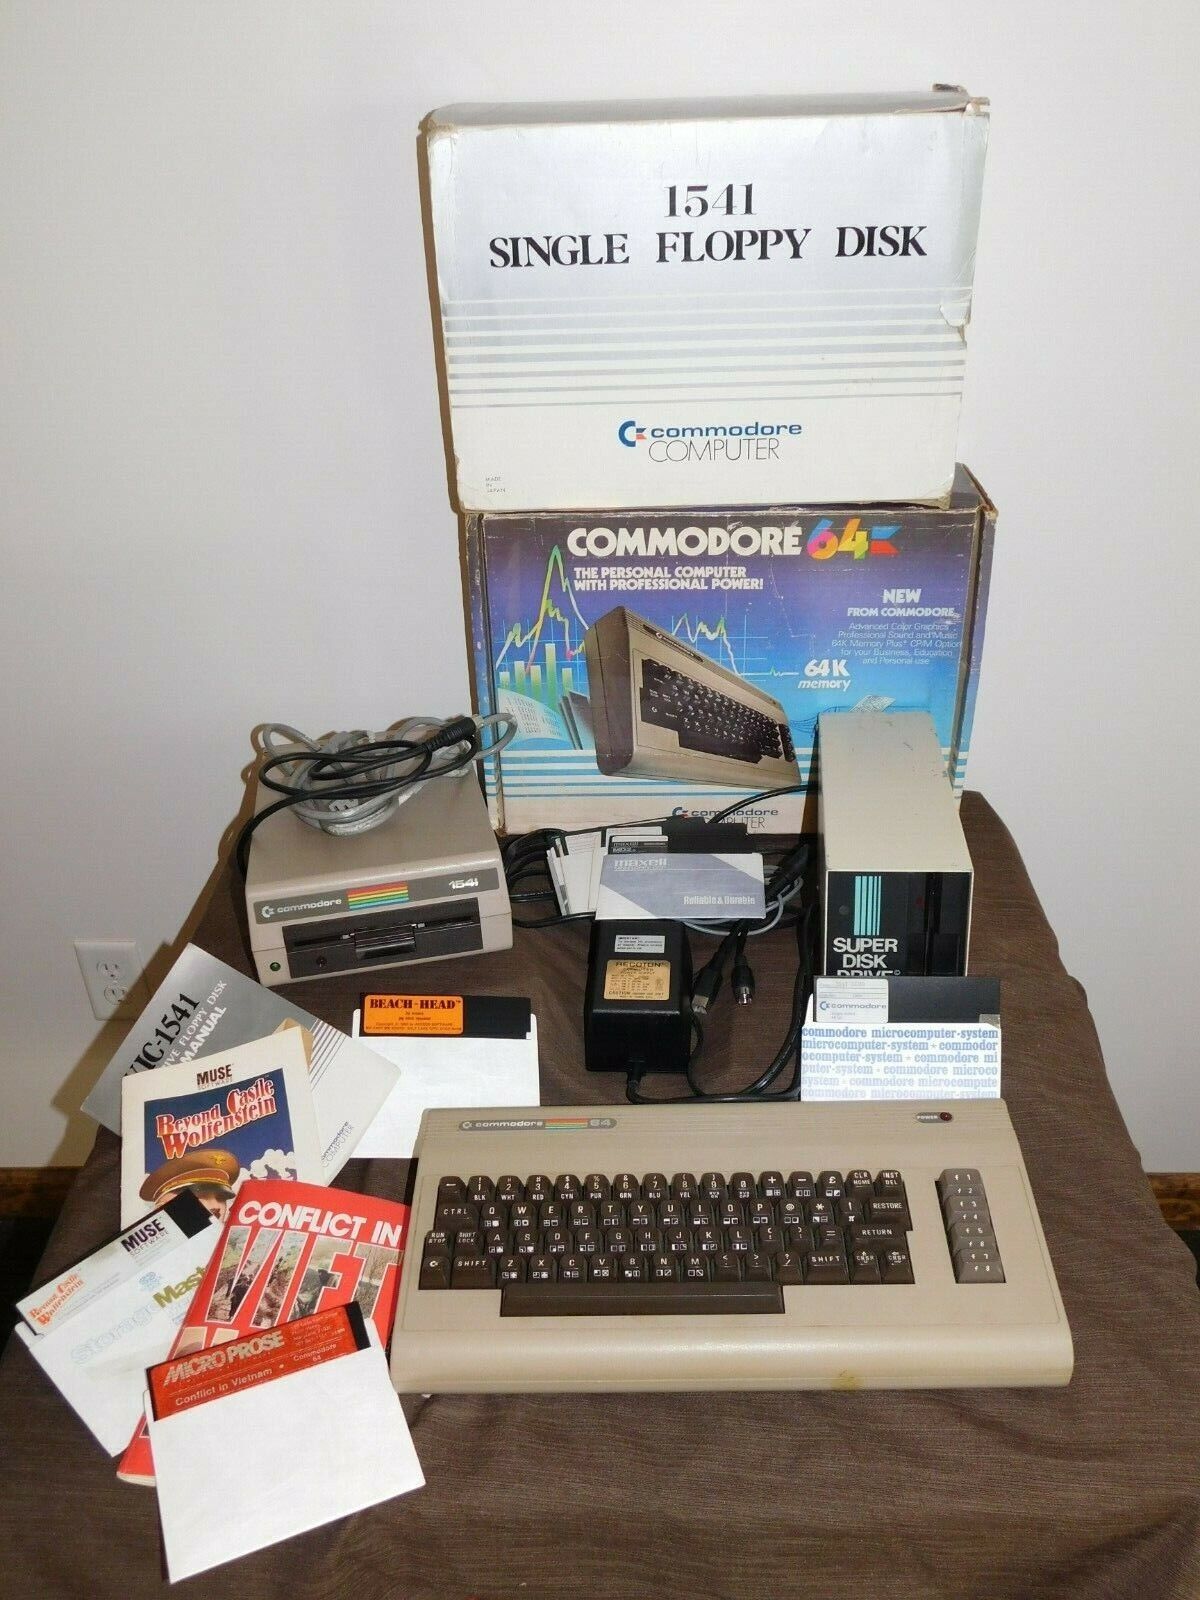 VINTAGE COMMODORE 64 COMPUTER W/ MSO SUPER DISK DRIVE & 1541 SINGLE FLOPPY DISK